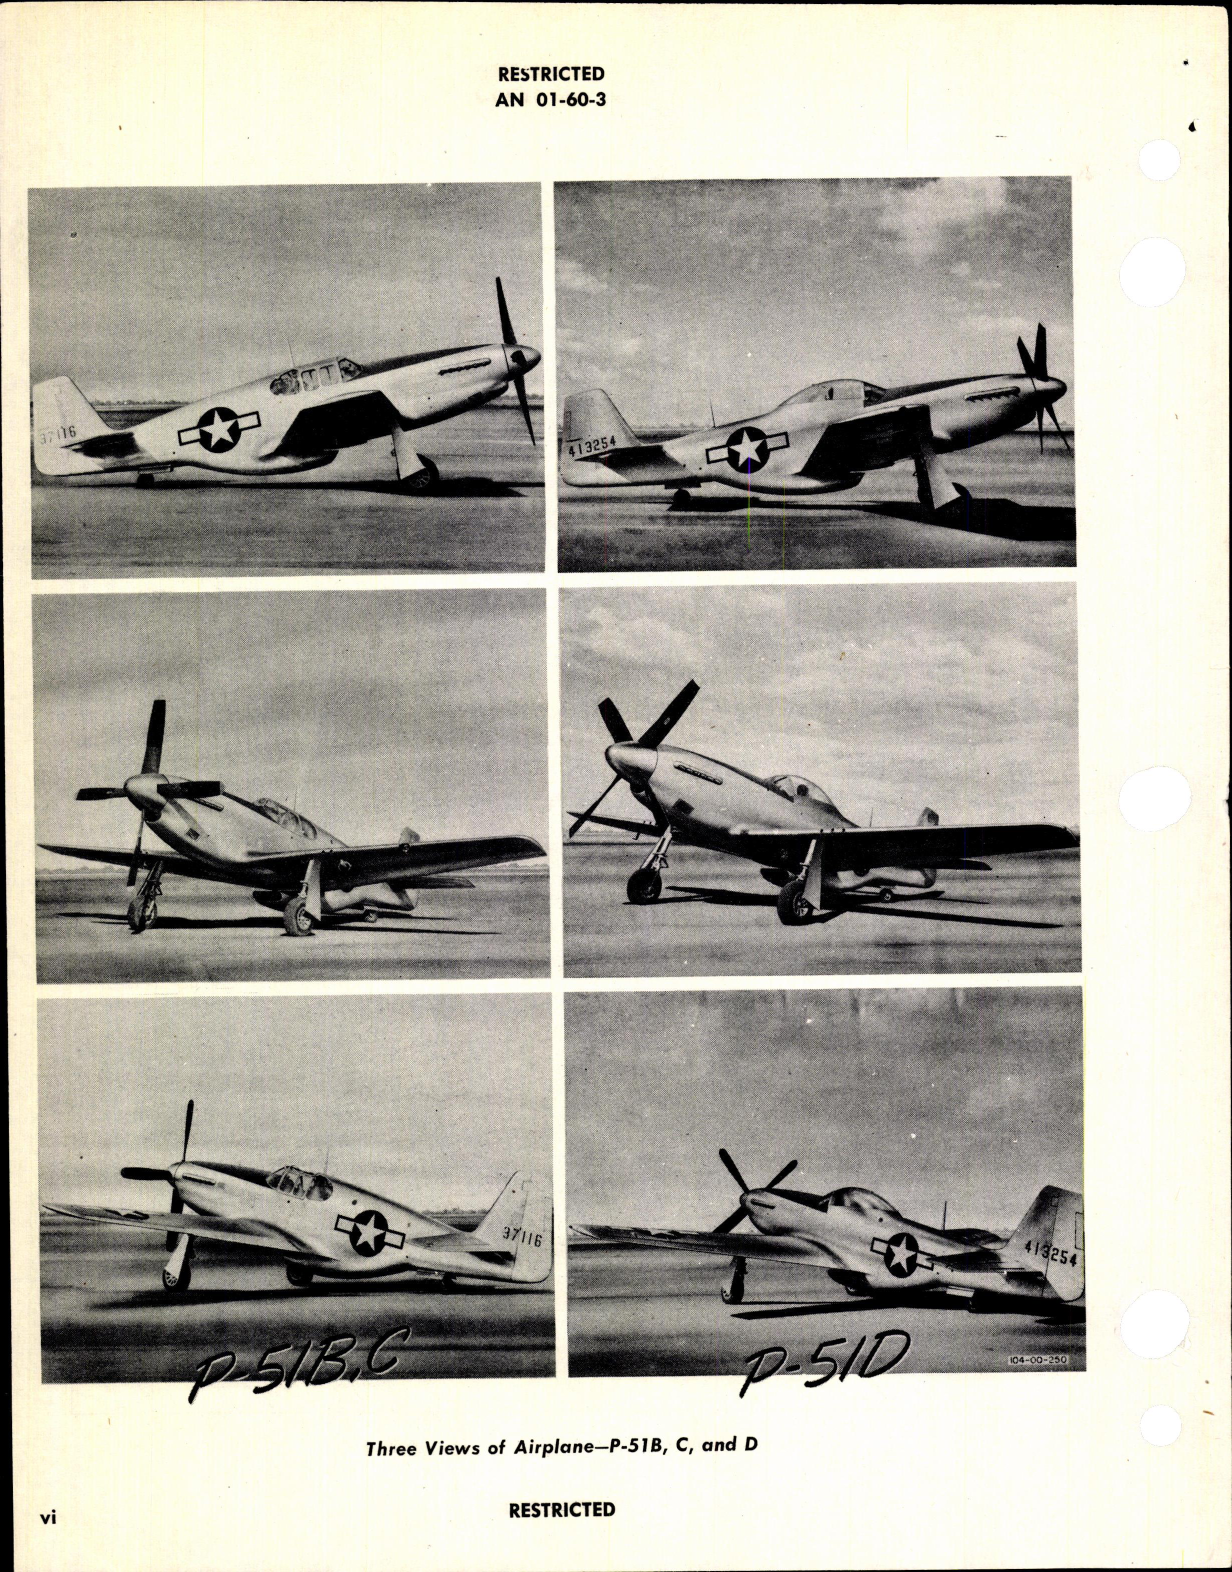 Sample page 8 from AirCorps Library document: Structural Repair Instructions for A-36, P-51, F-6, and TF-51